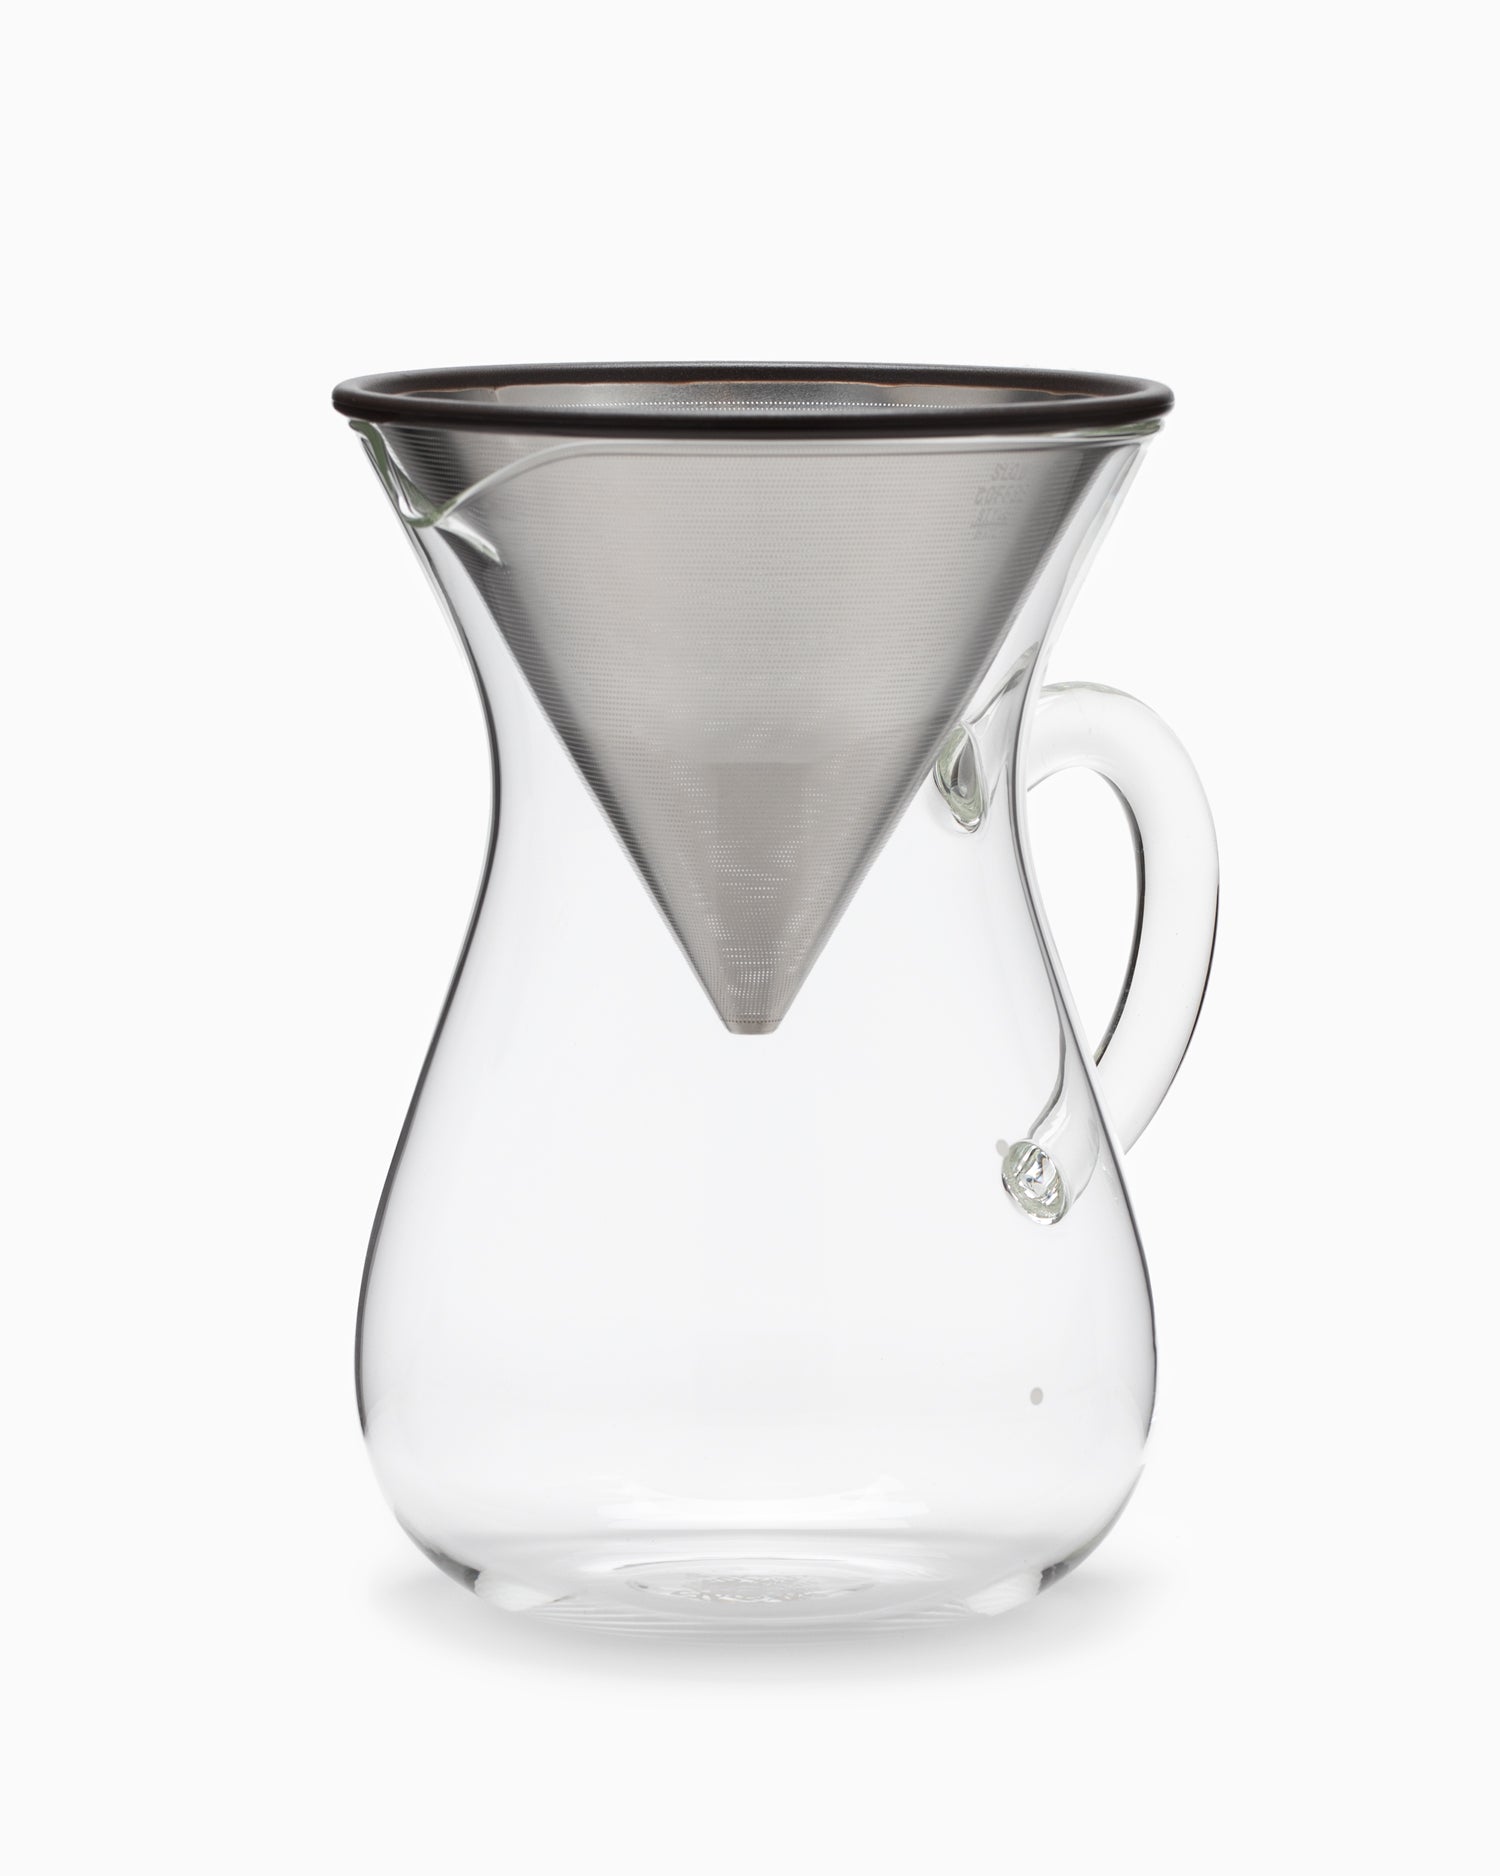 SCS Coffee Carafe 4 Cups